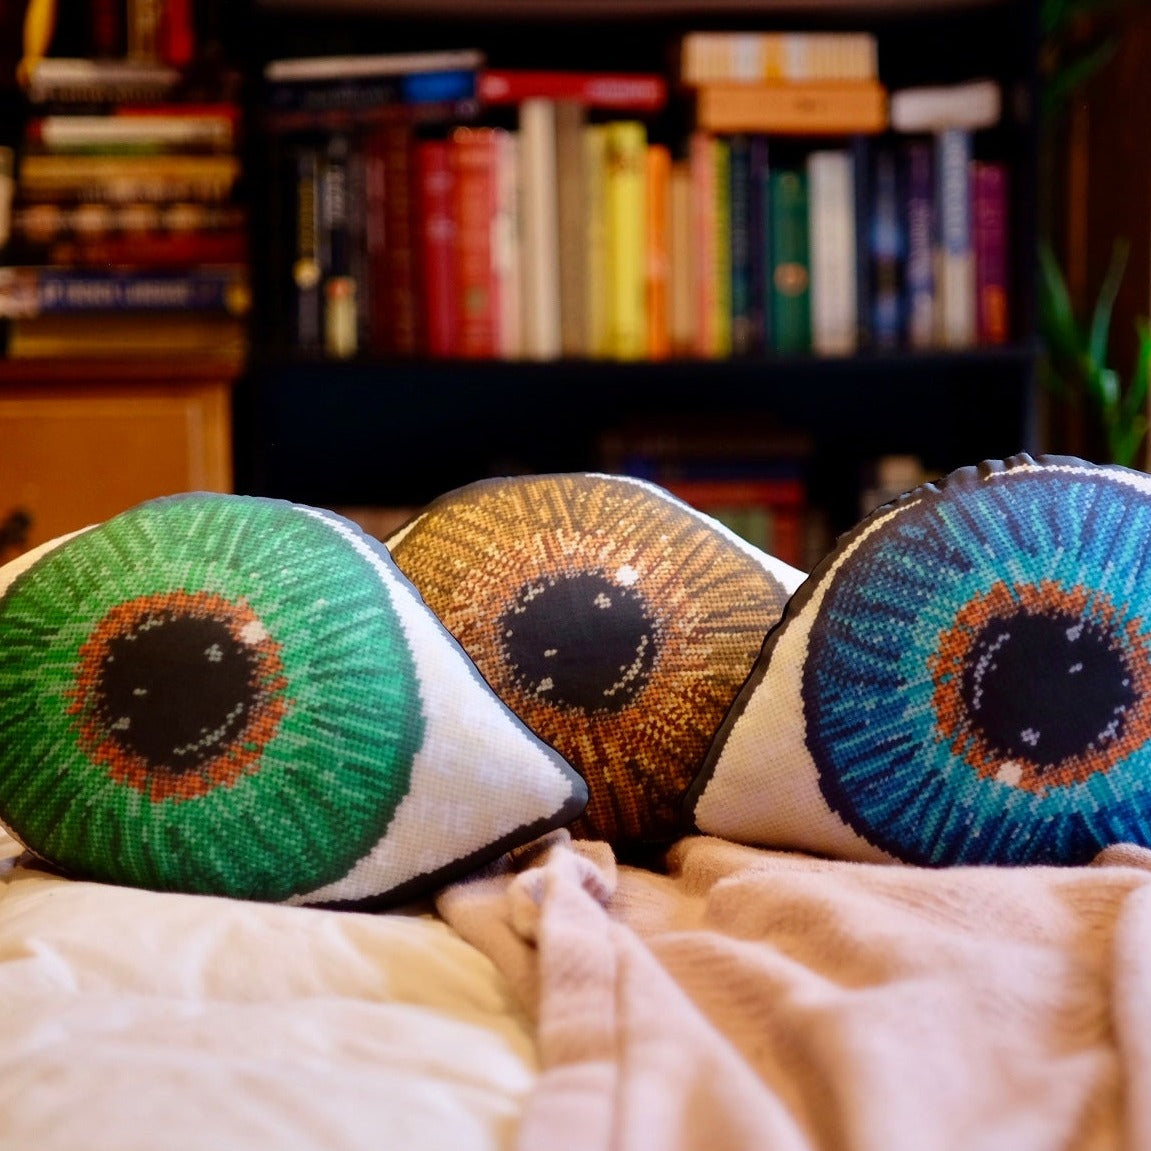 sculpted eye pillows have gold in centers, gradually turning to darker shades of blue, green & brown - very detailed